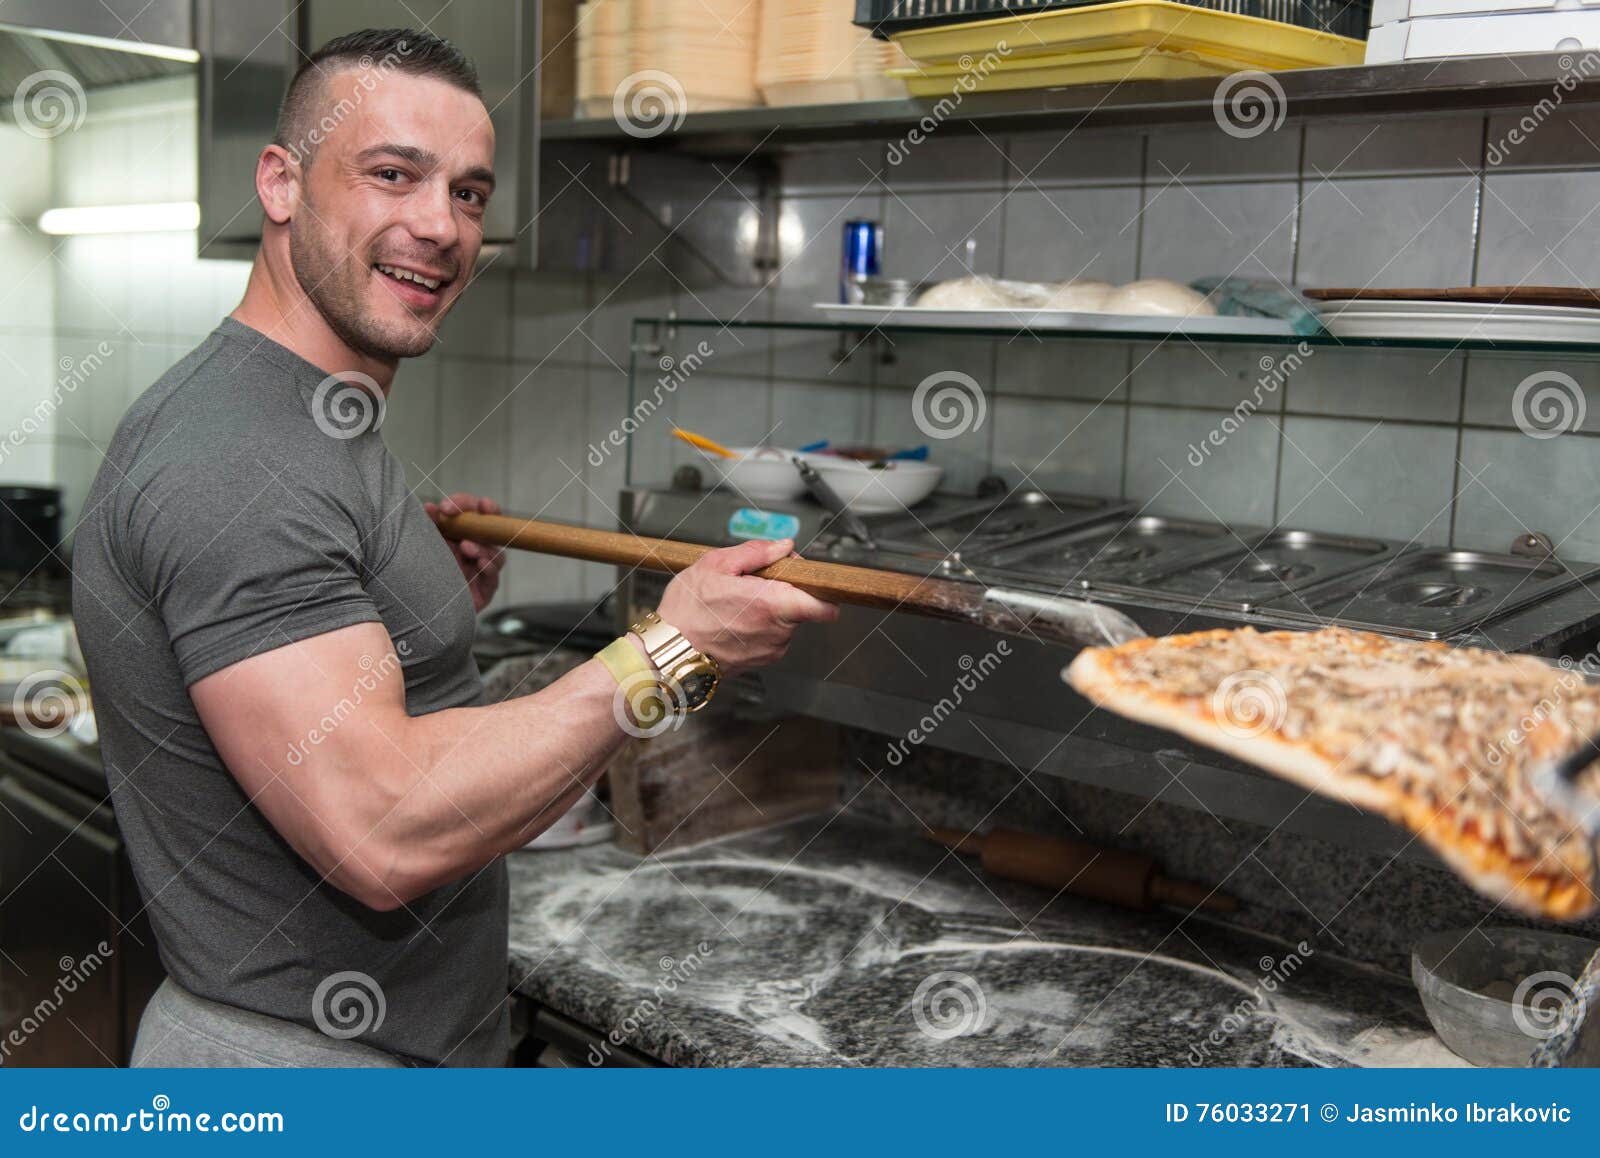 Young Man Putting Pizza Into The Oven Stock Image Image Of Caucasian